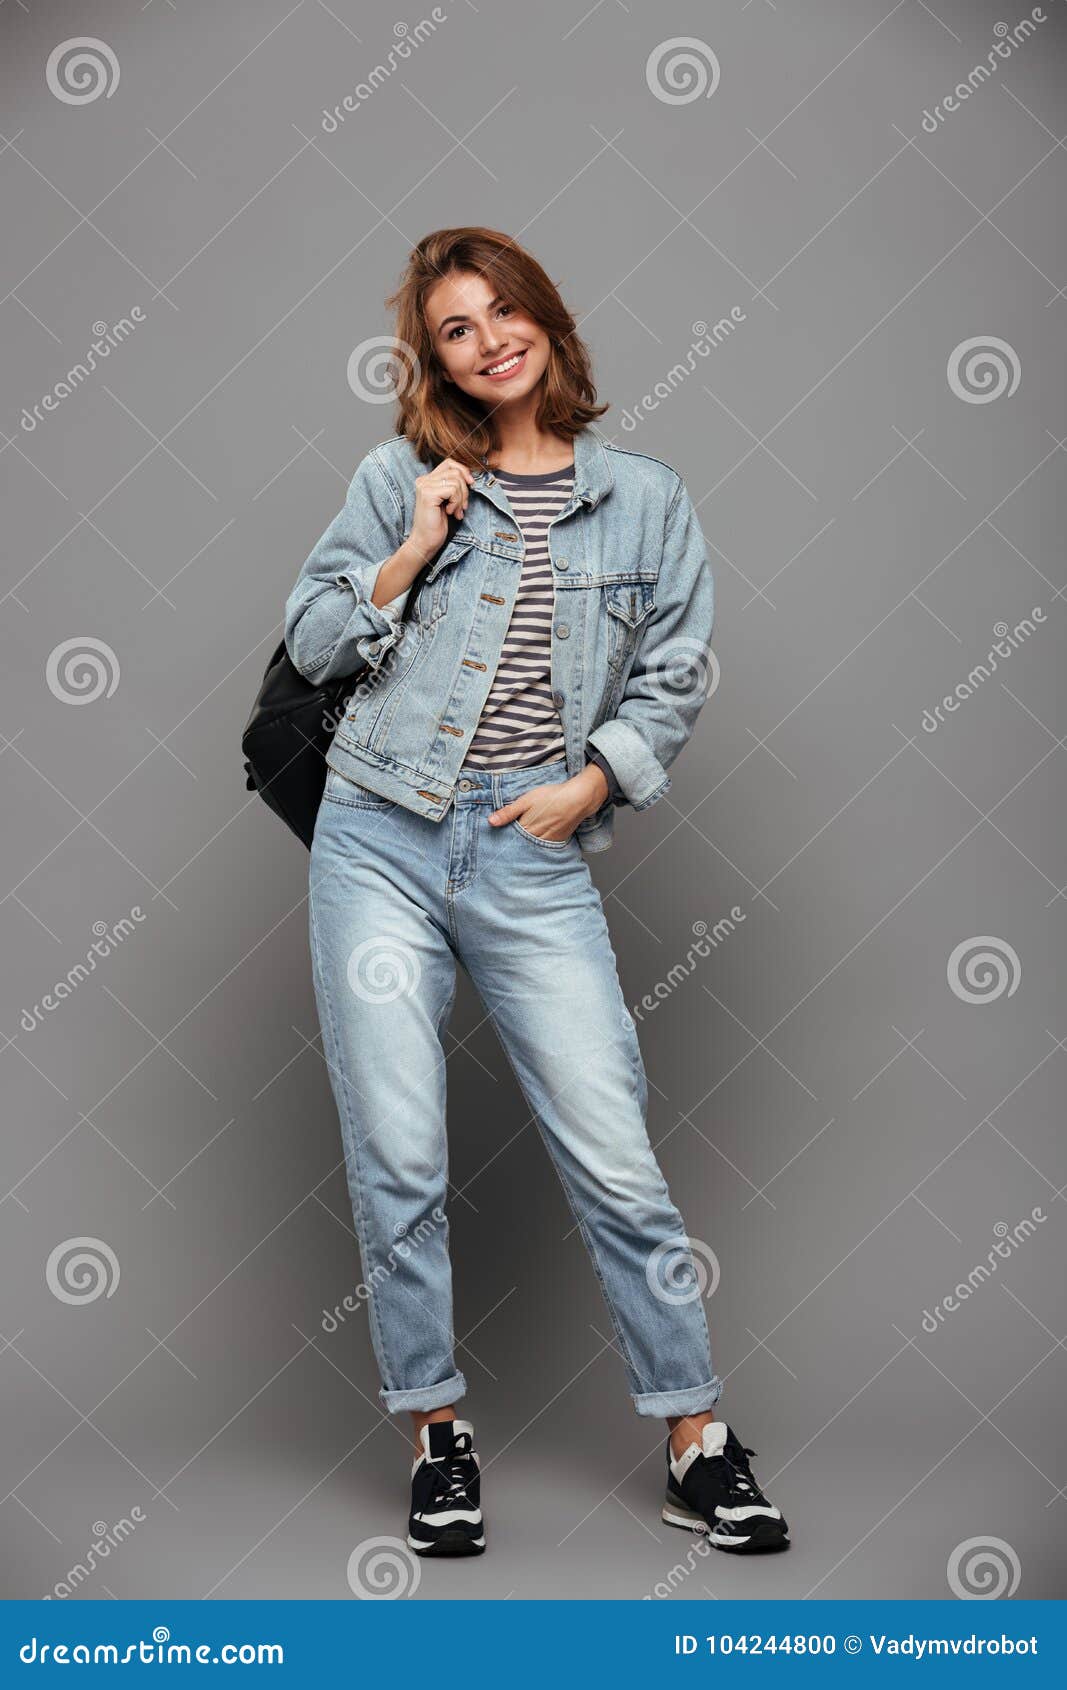 Nice Girl Poses For The Camera On A Sunny Day Stock Photo, Picture and  Royalty Free Image. Image 56213473.